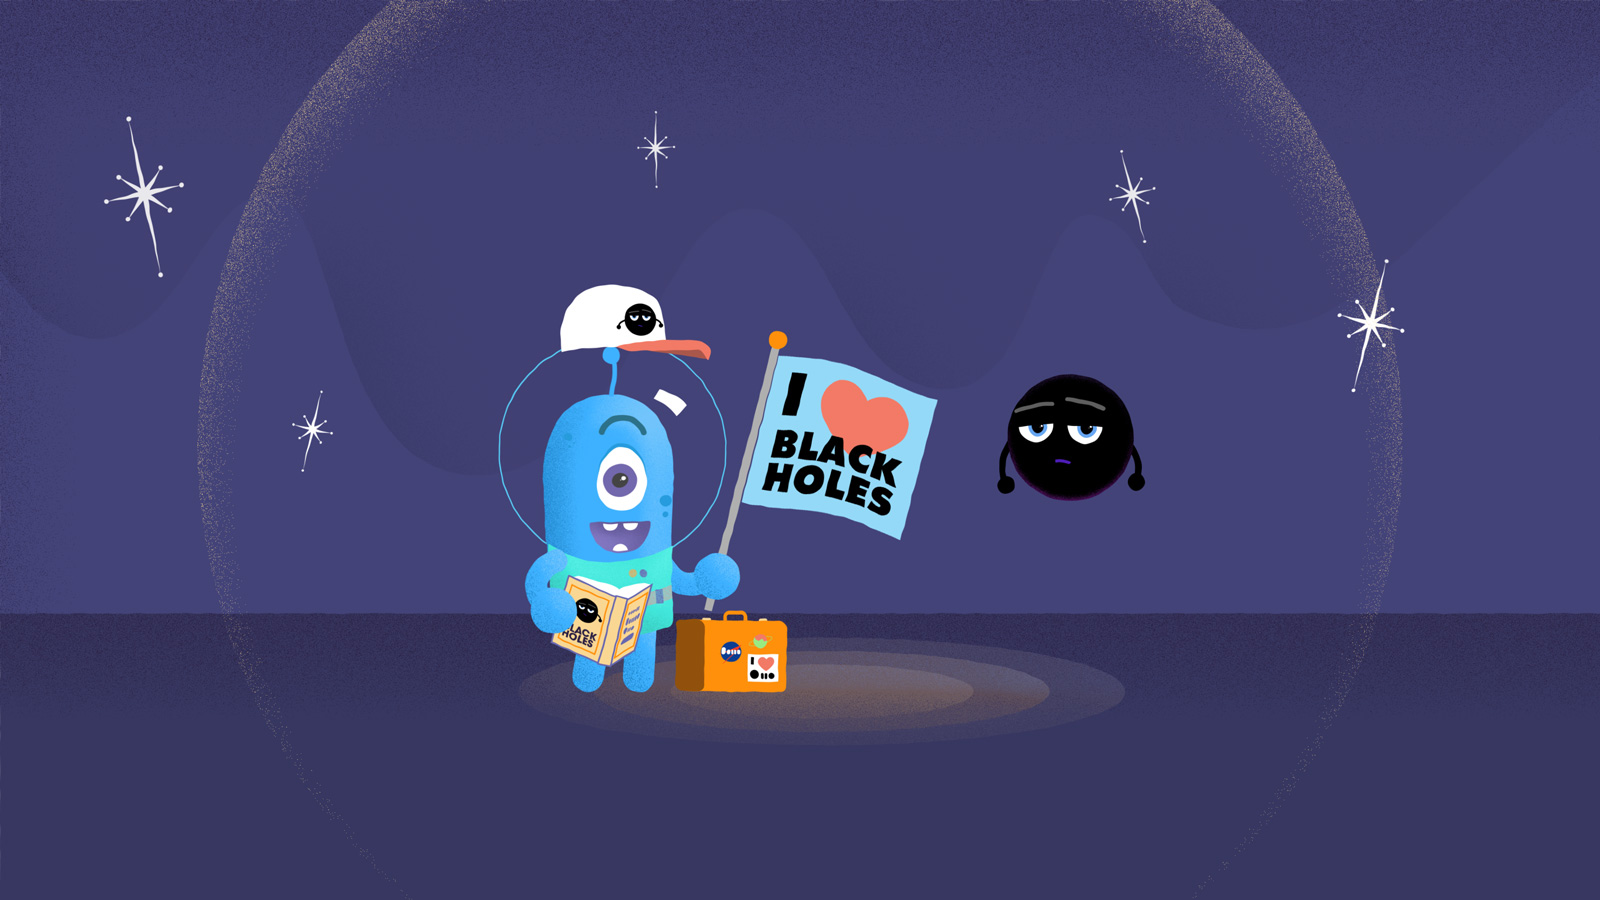 Against a purple background stands a smiling blue cartoon figure shaped like a round-topped cylinder with one eye and an antenna. They are wearing a bubble-shaped helmet, green space suit, and a baseball cap with a black hole figure. In one hand is a book on black holes and in the other is a flag that says “I heart black holes.” Next to them is a suitcase adorned with a few illegible stickers. Next to them is a cartoon black hole with narrowed eyes and a raised eyebrow.